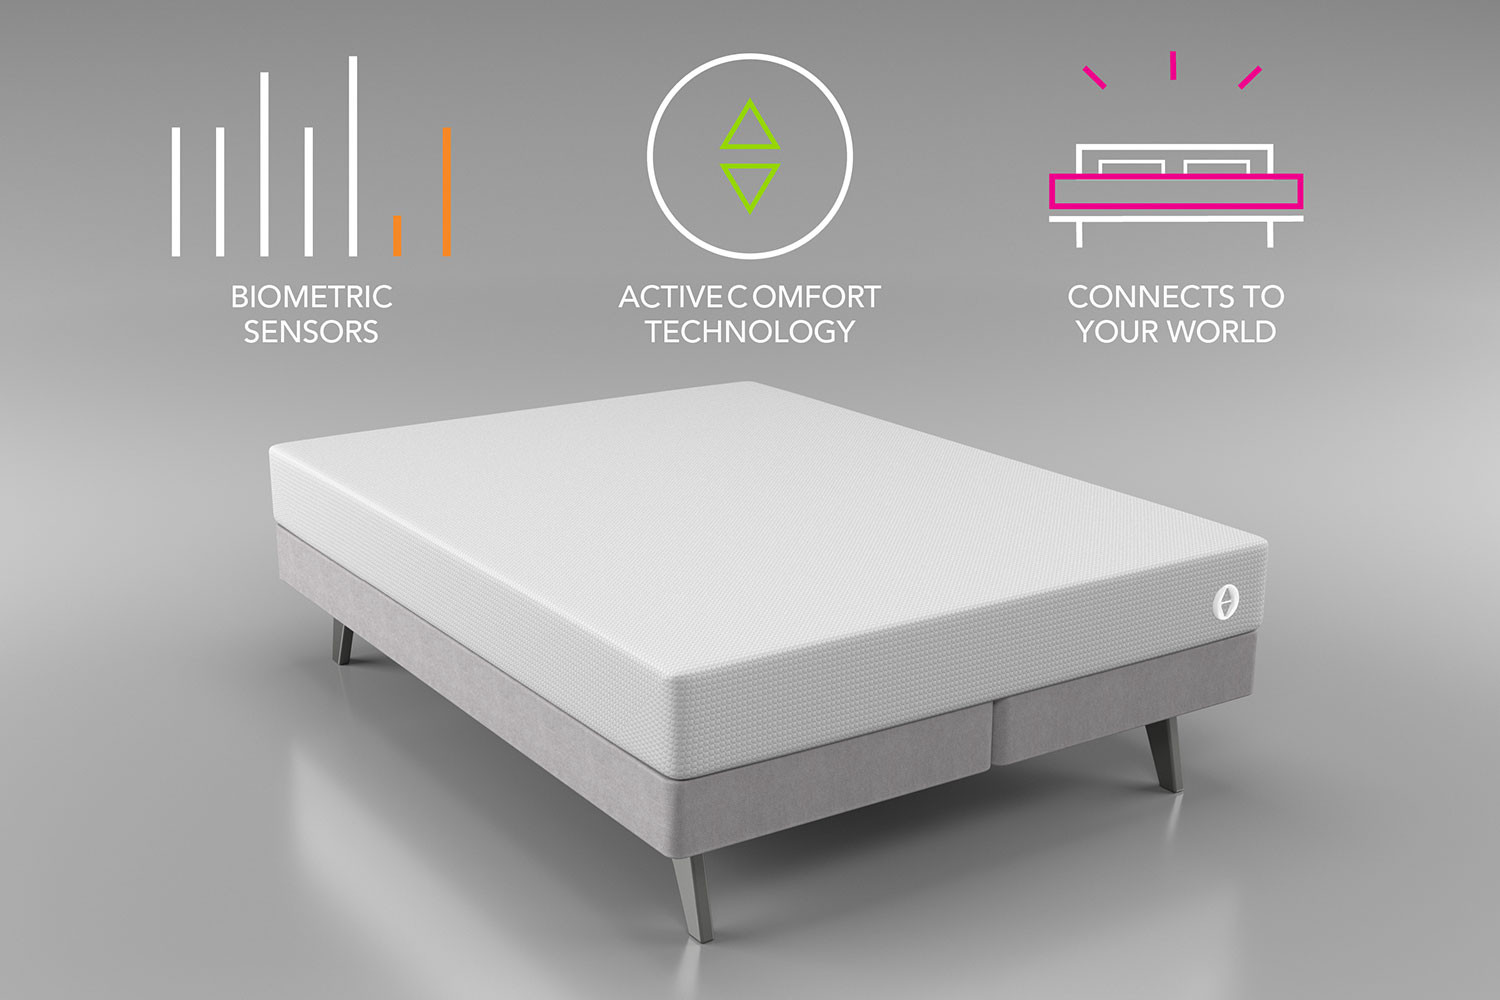 sleep number introduces the it bed at ces 2016 by connected image v2